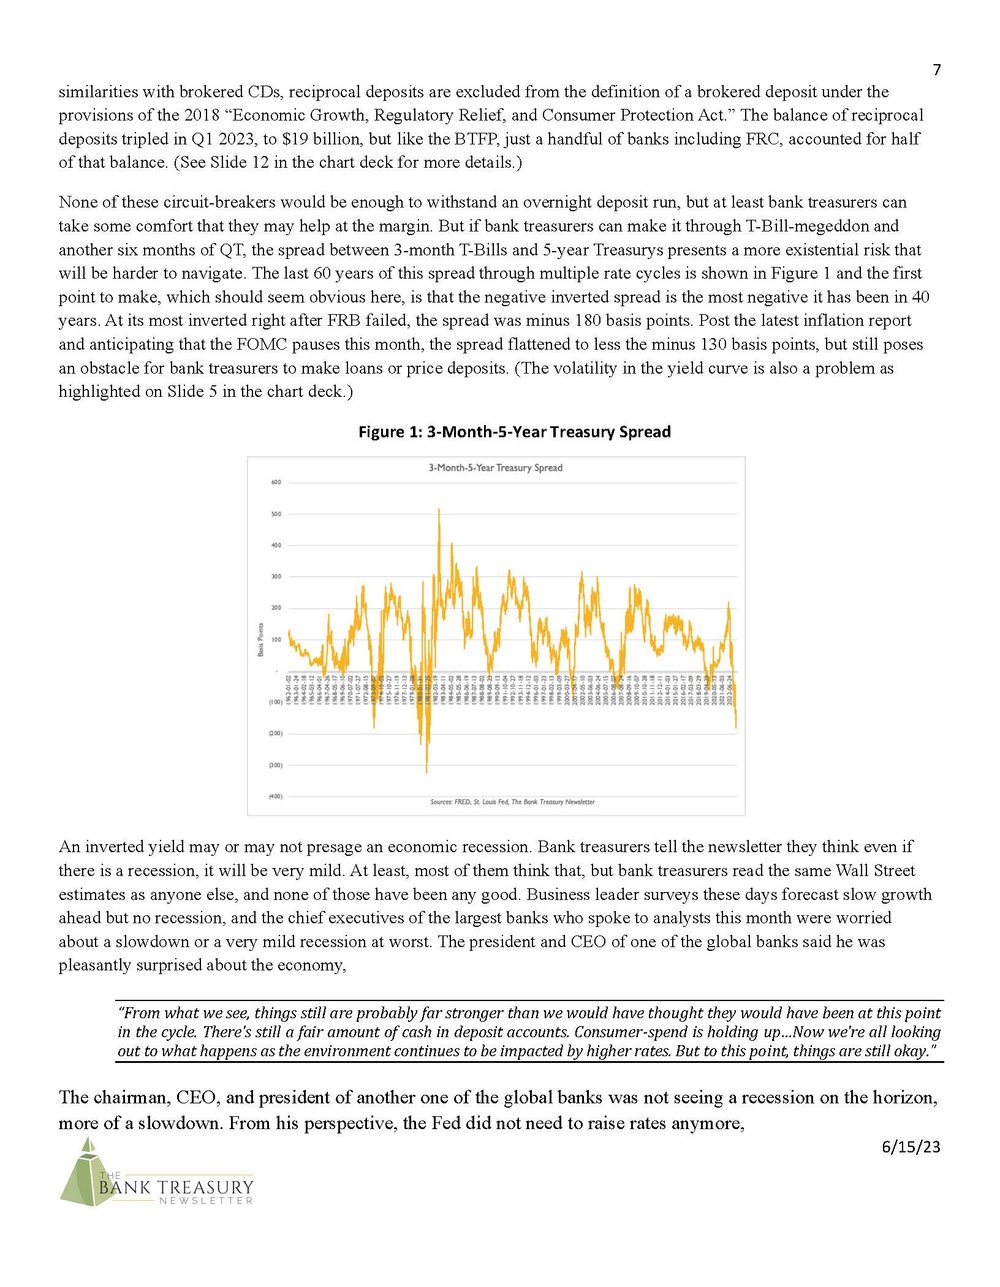 The+Bank+Treasury+Newsletter+June+2023_Page_07.jpg